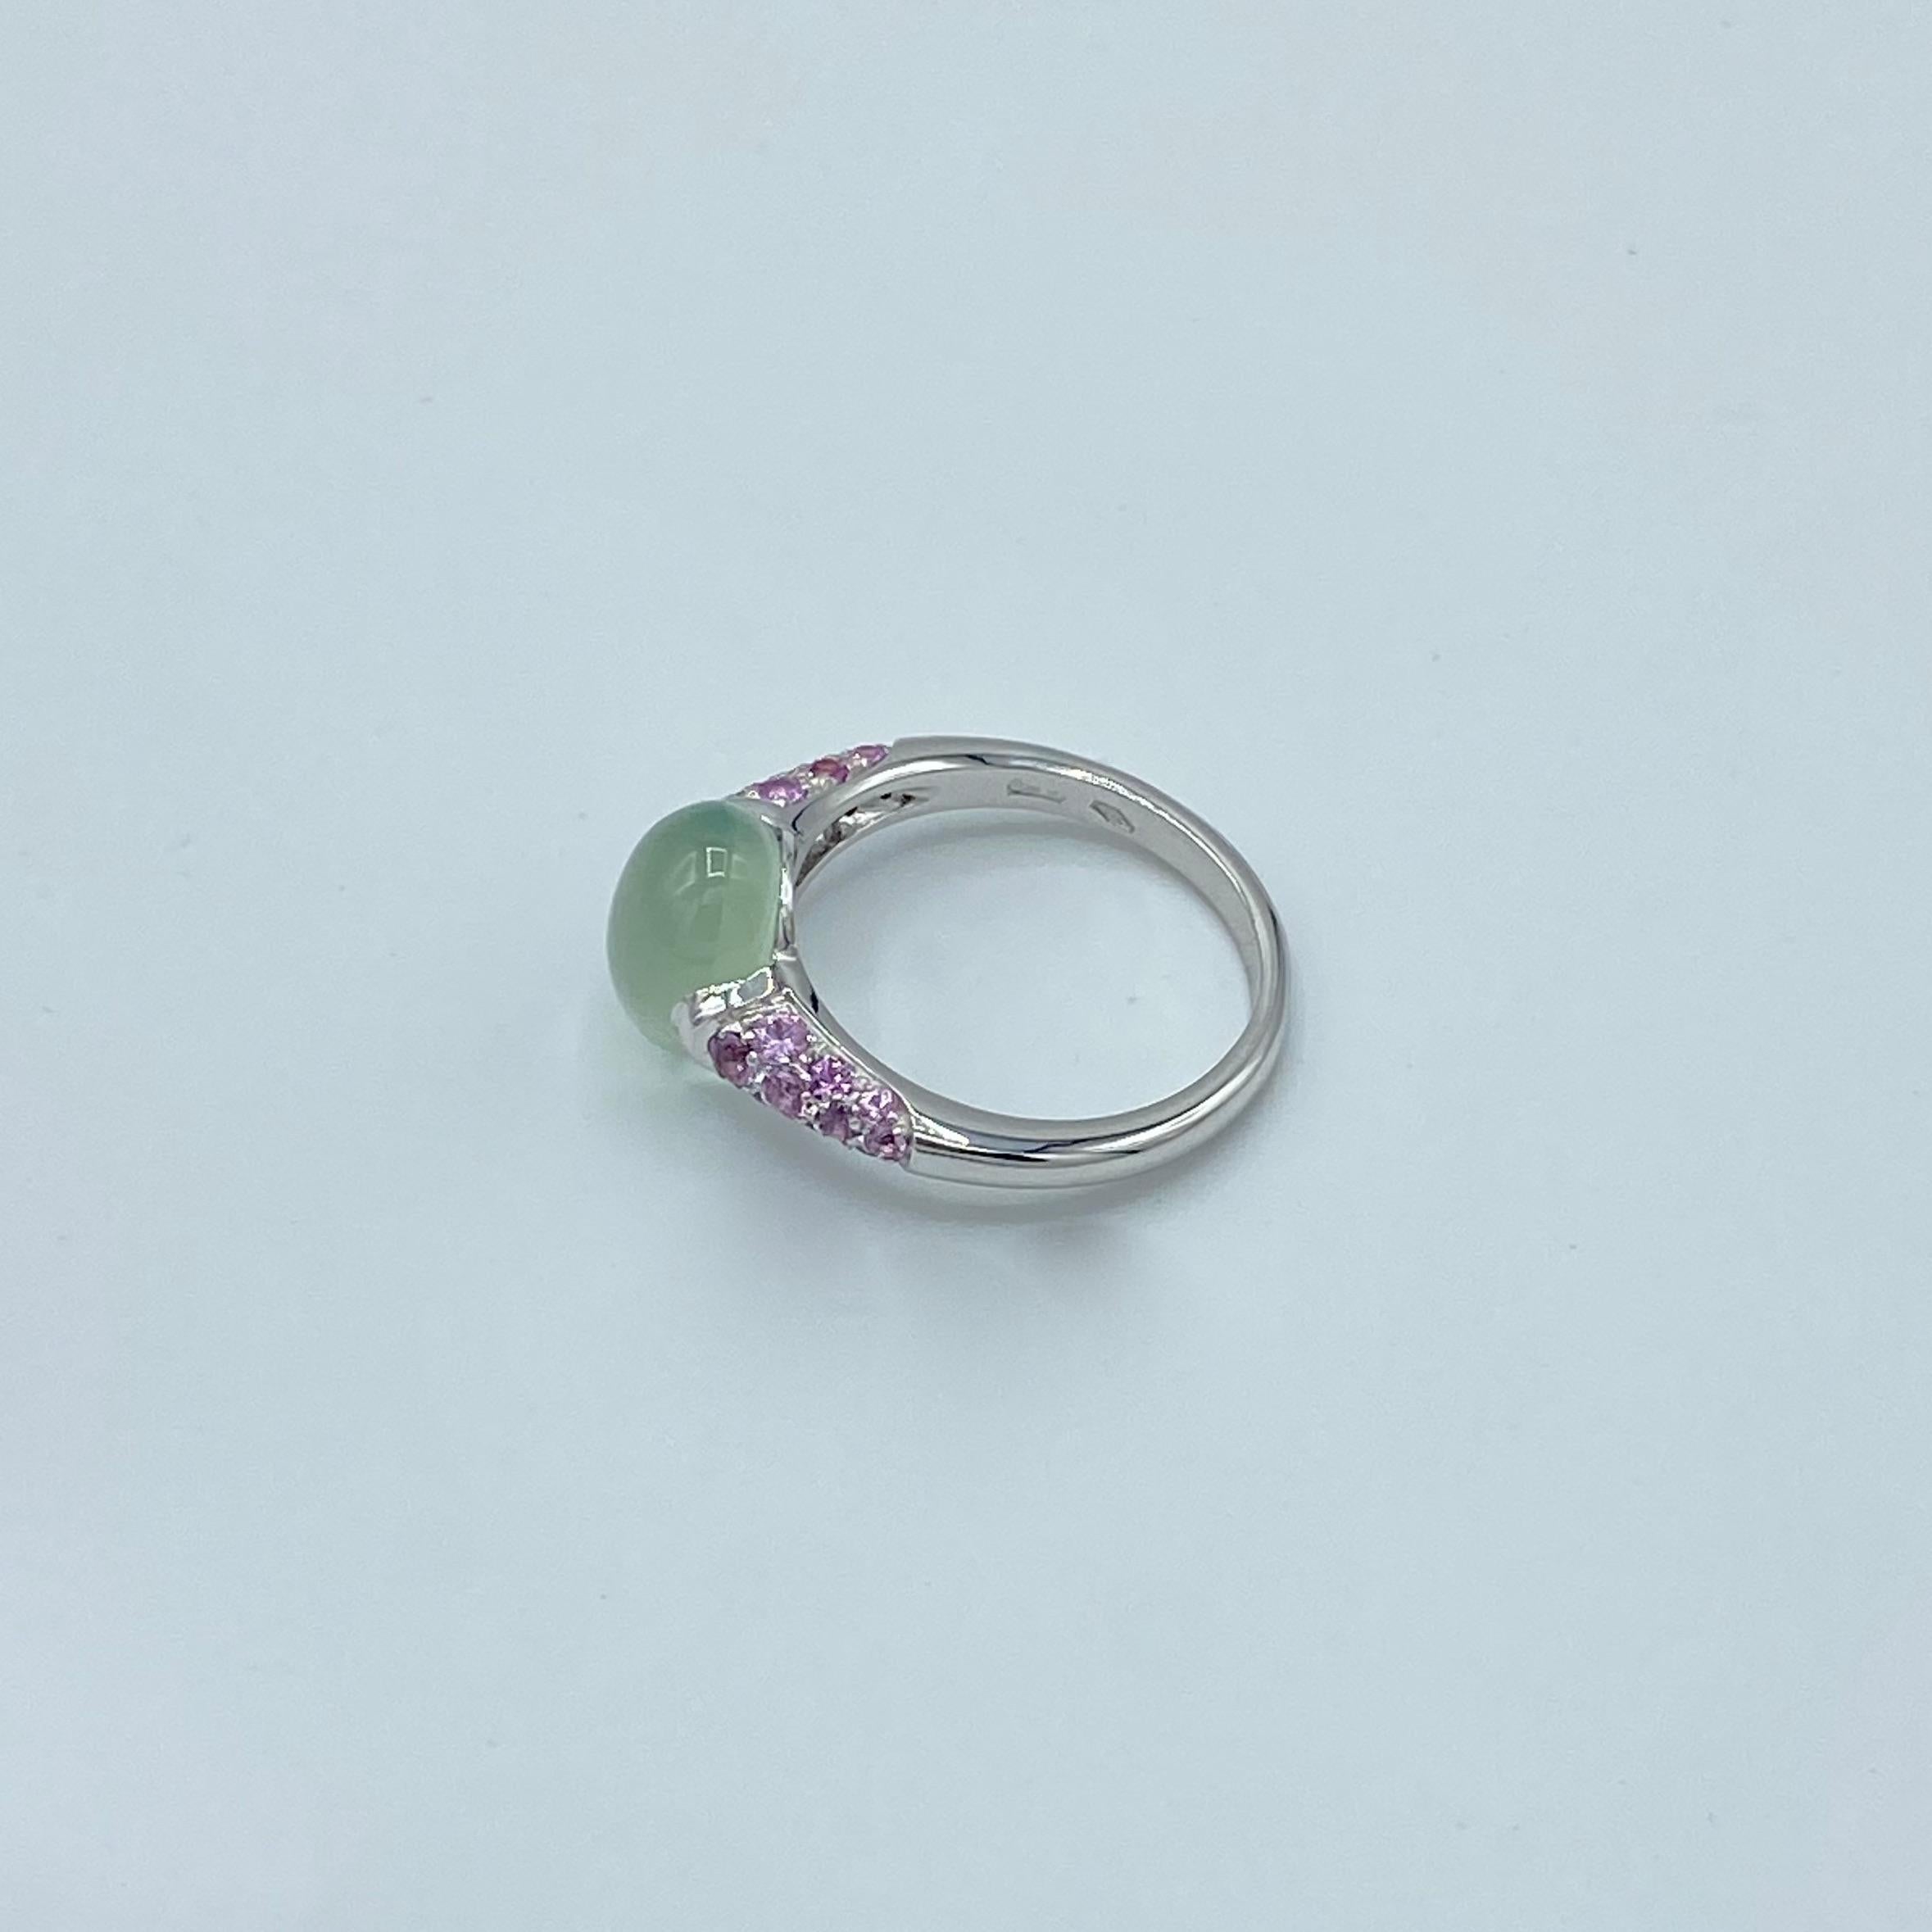 Prehnite Gemstone Cabochon Pink Sapphire White 18 Kt Gold Ring Made in Italy For Sale 3